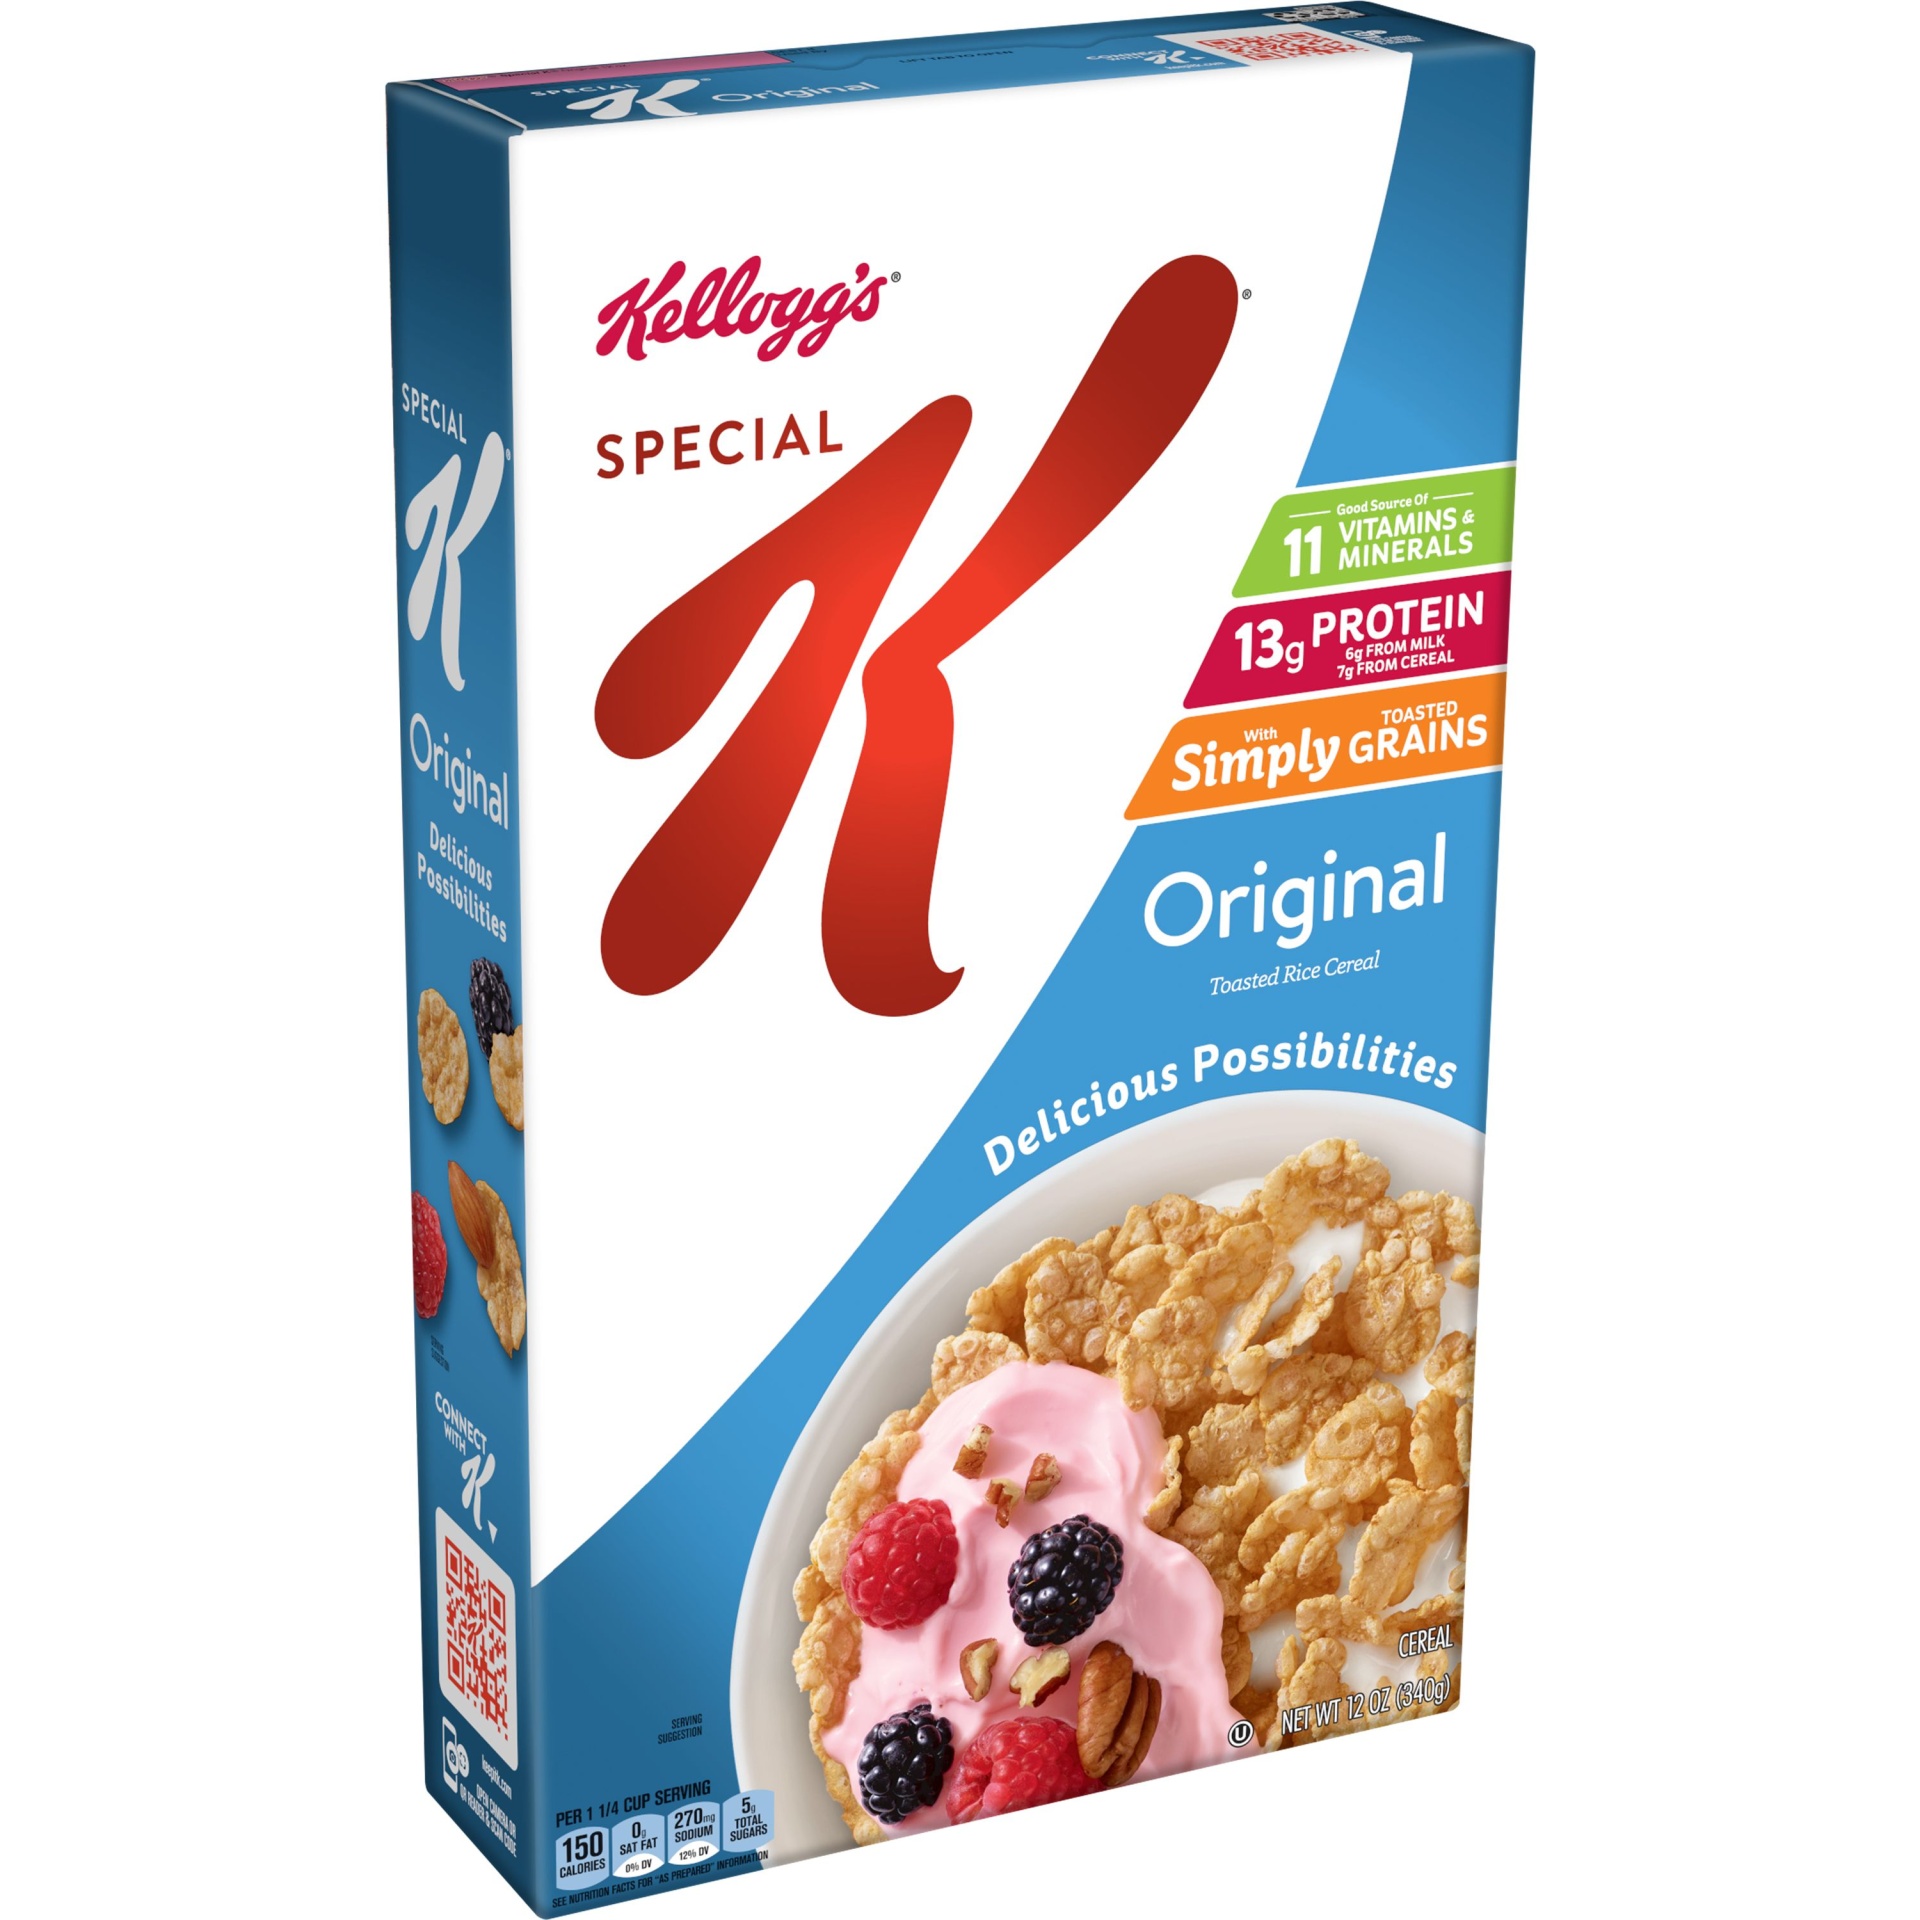 slide 1 of 1, Kellogg's Special K Breakfast Cereal, 11 Vitamins and Minerals, Made with Folic Acid, B Vitamins and Iron, Original, 12 oz